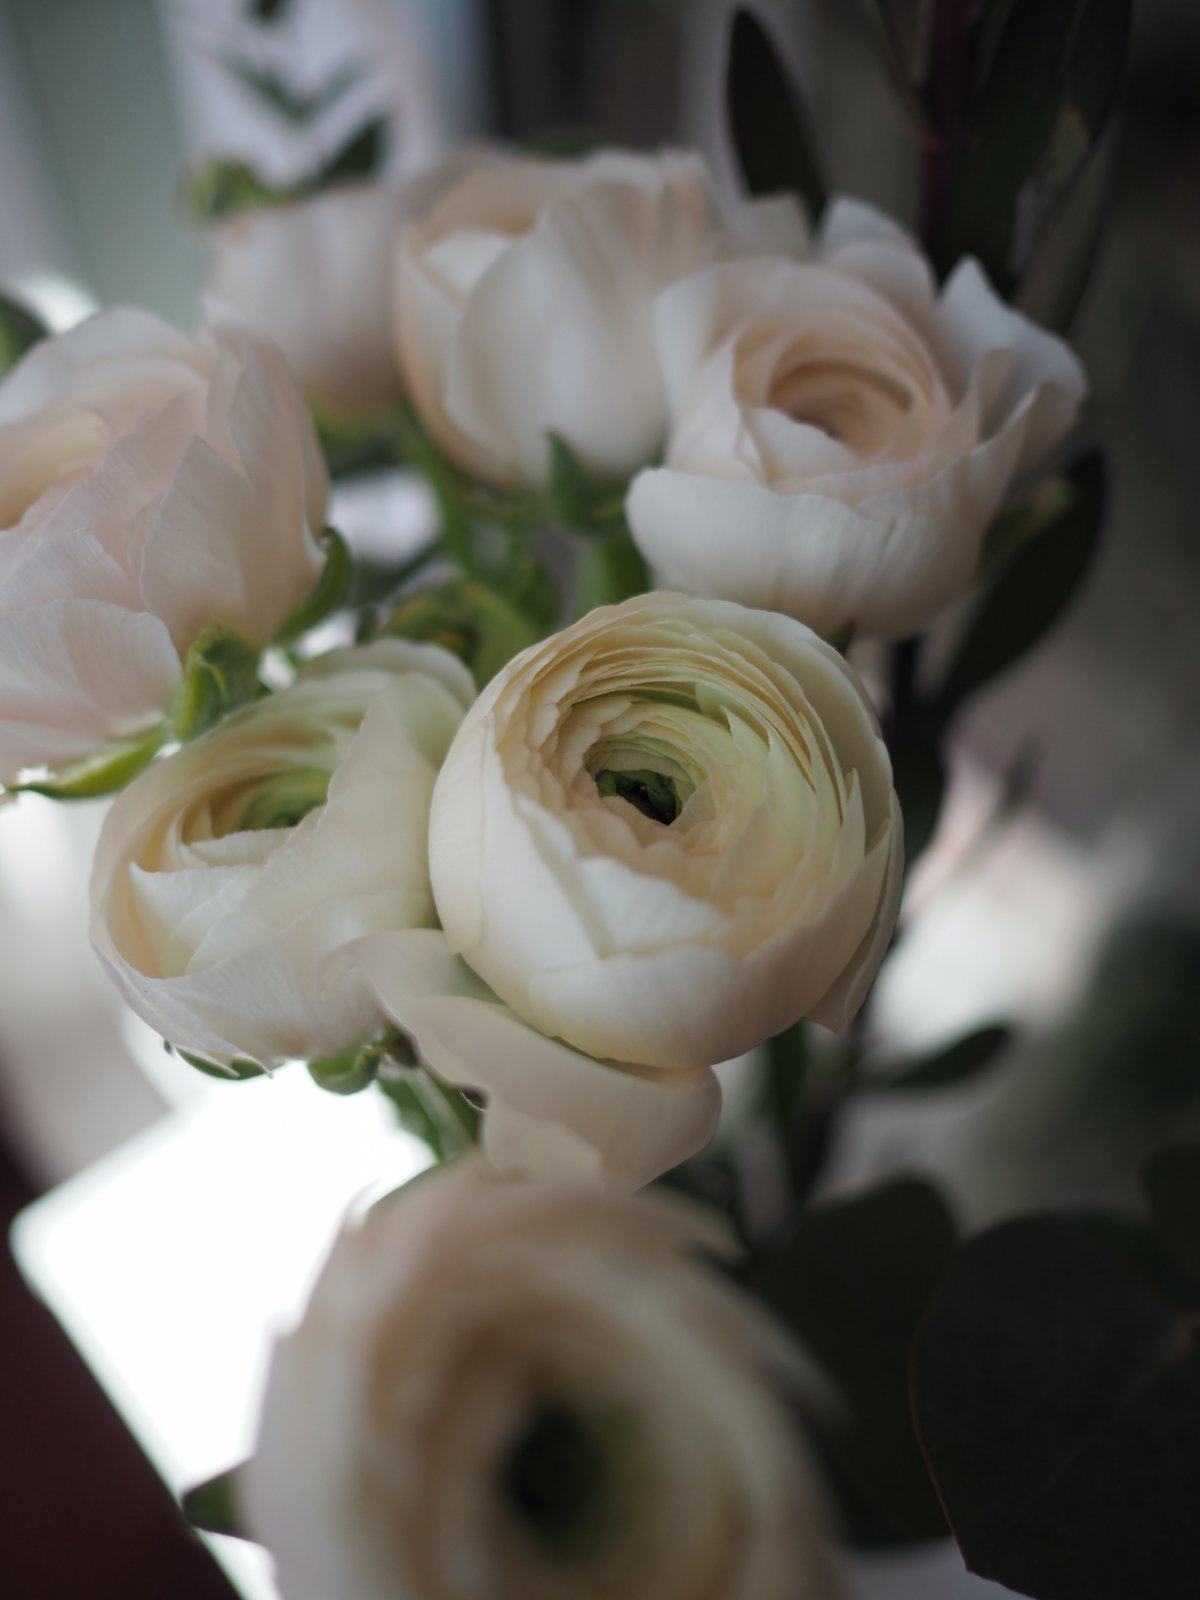 Pictures of exquisite and beautiful ranunculus flowers